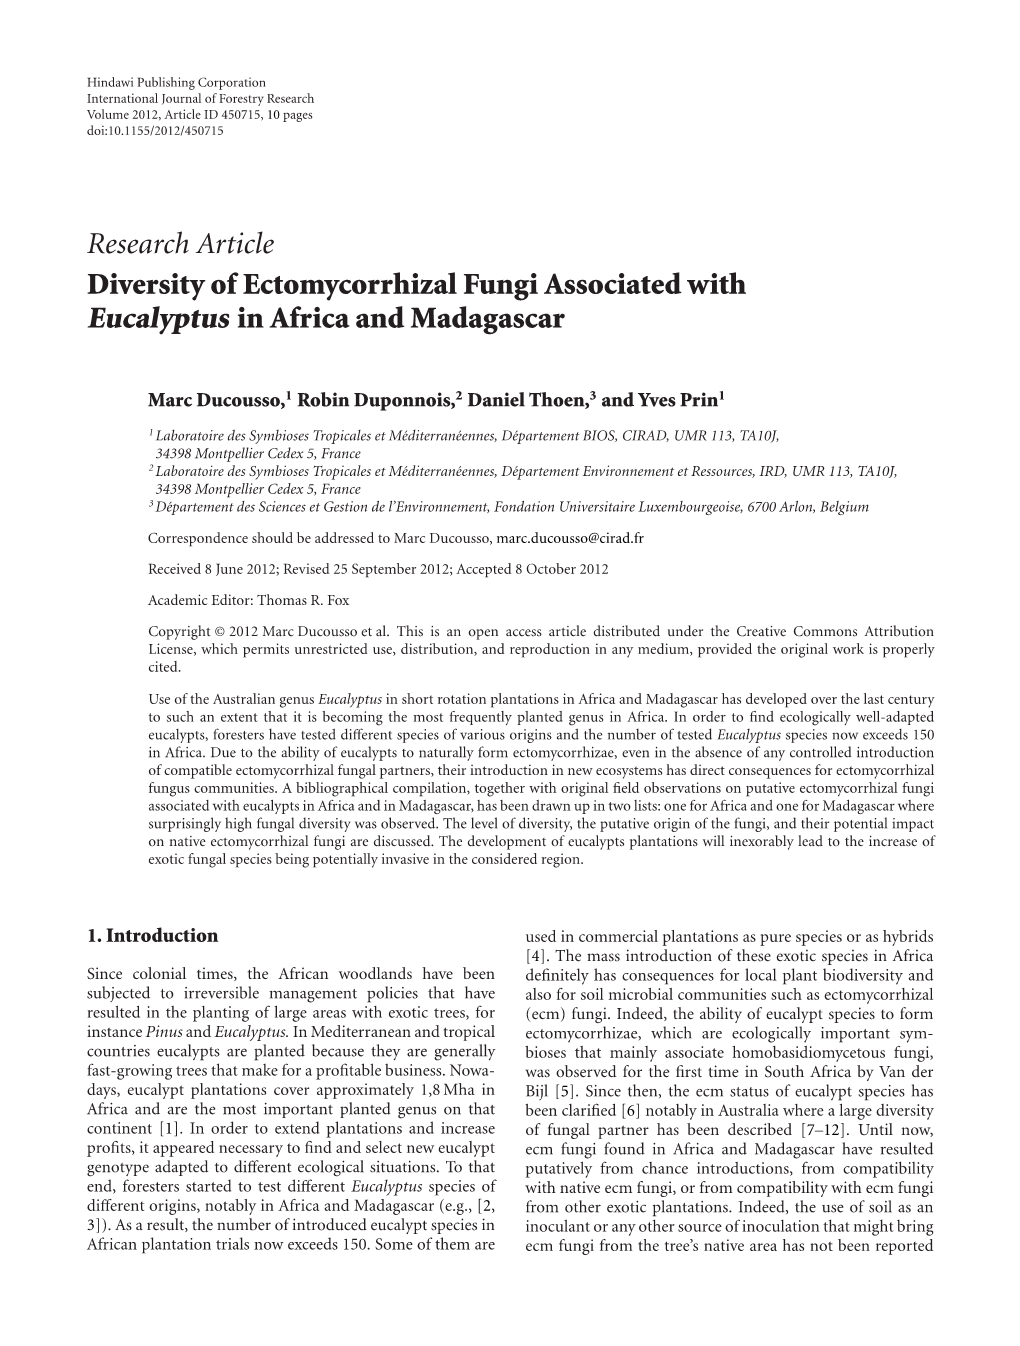 Research Article Diversity of Ectomycorrhizal Fungi Associated with Eucalyptus in Africa and Madagascar